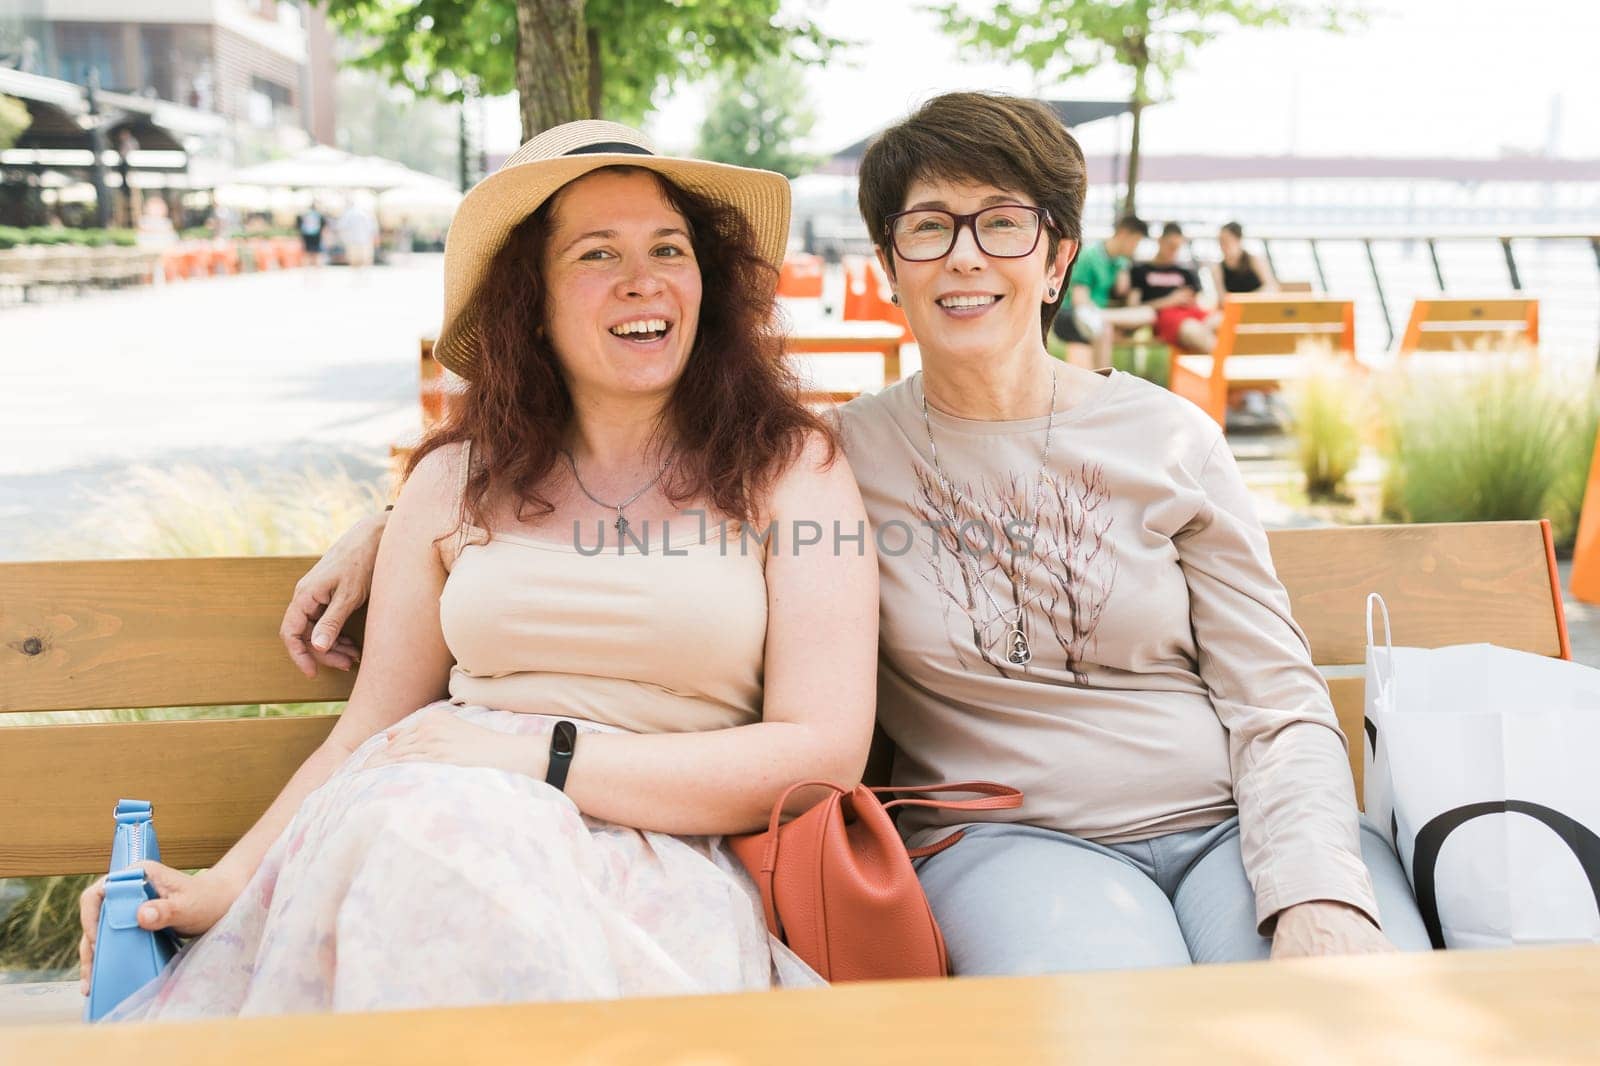 Happy mature mother and her adult daughter enjoying in conversation while spending Mother's day together in a cafe.